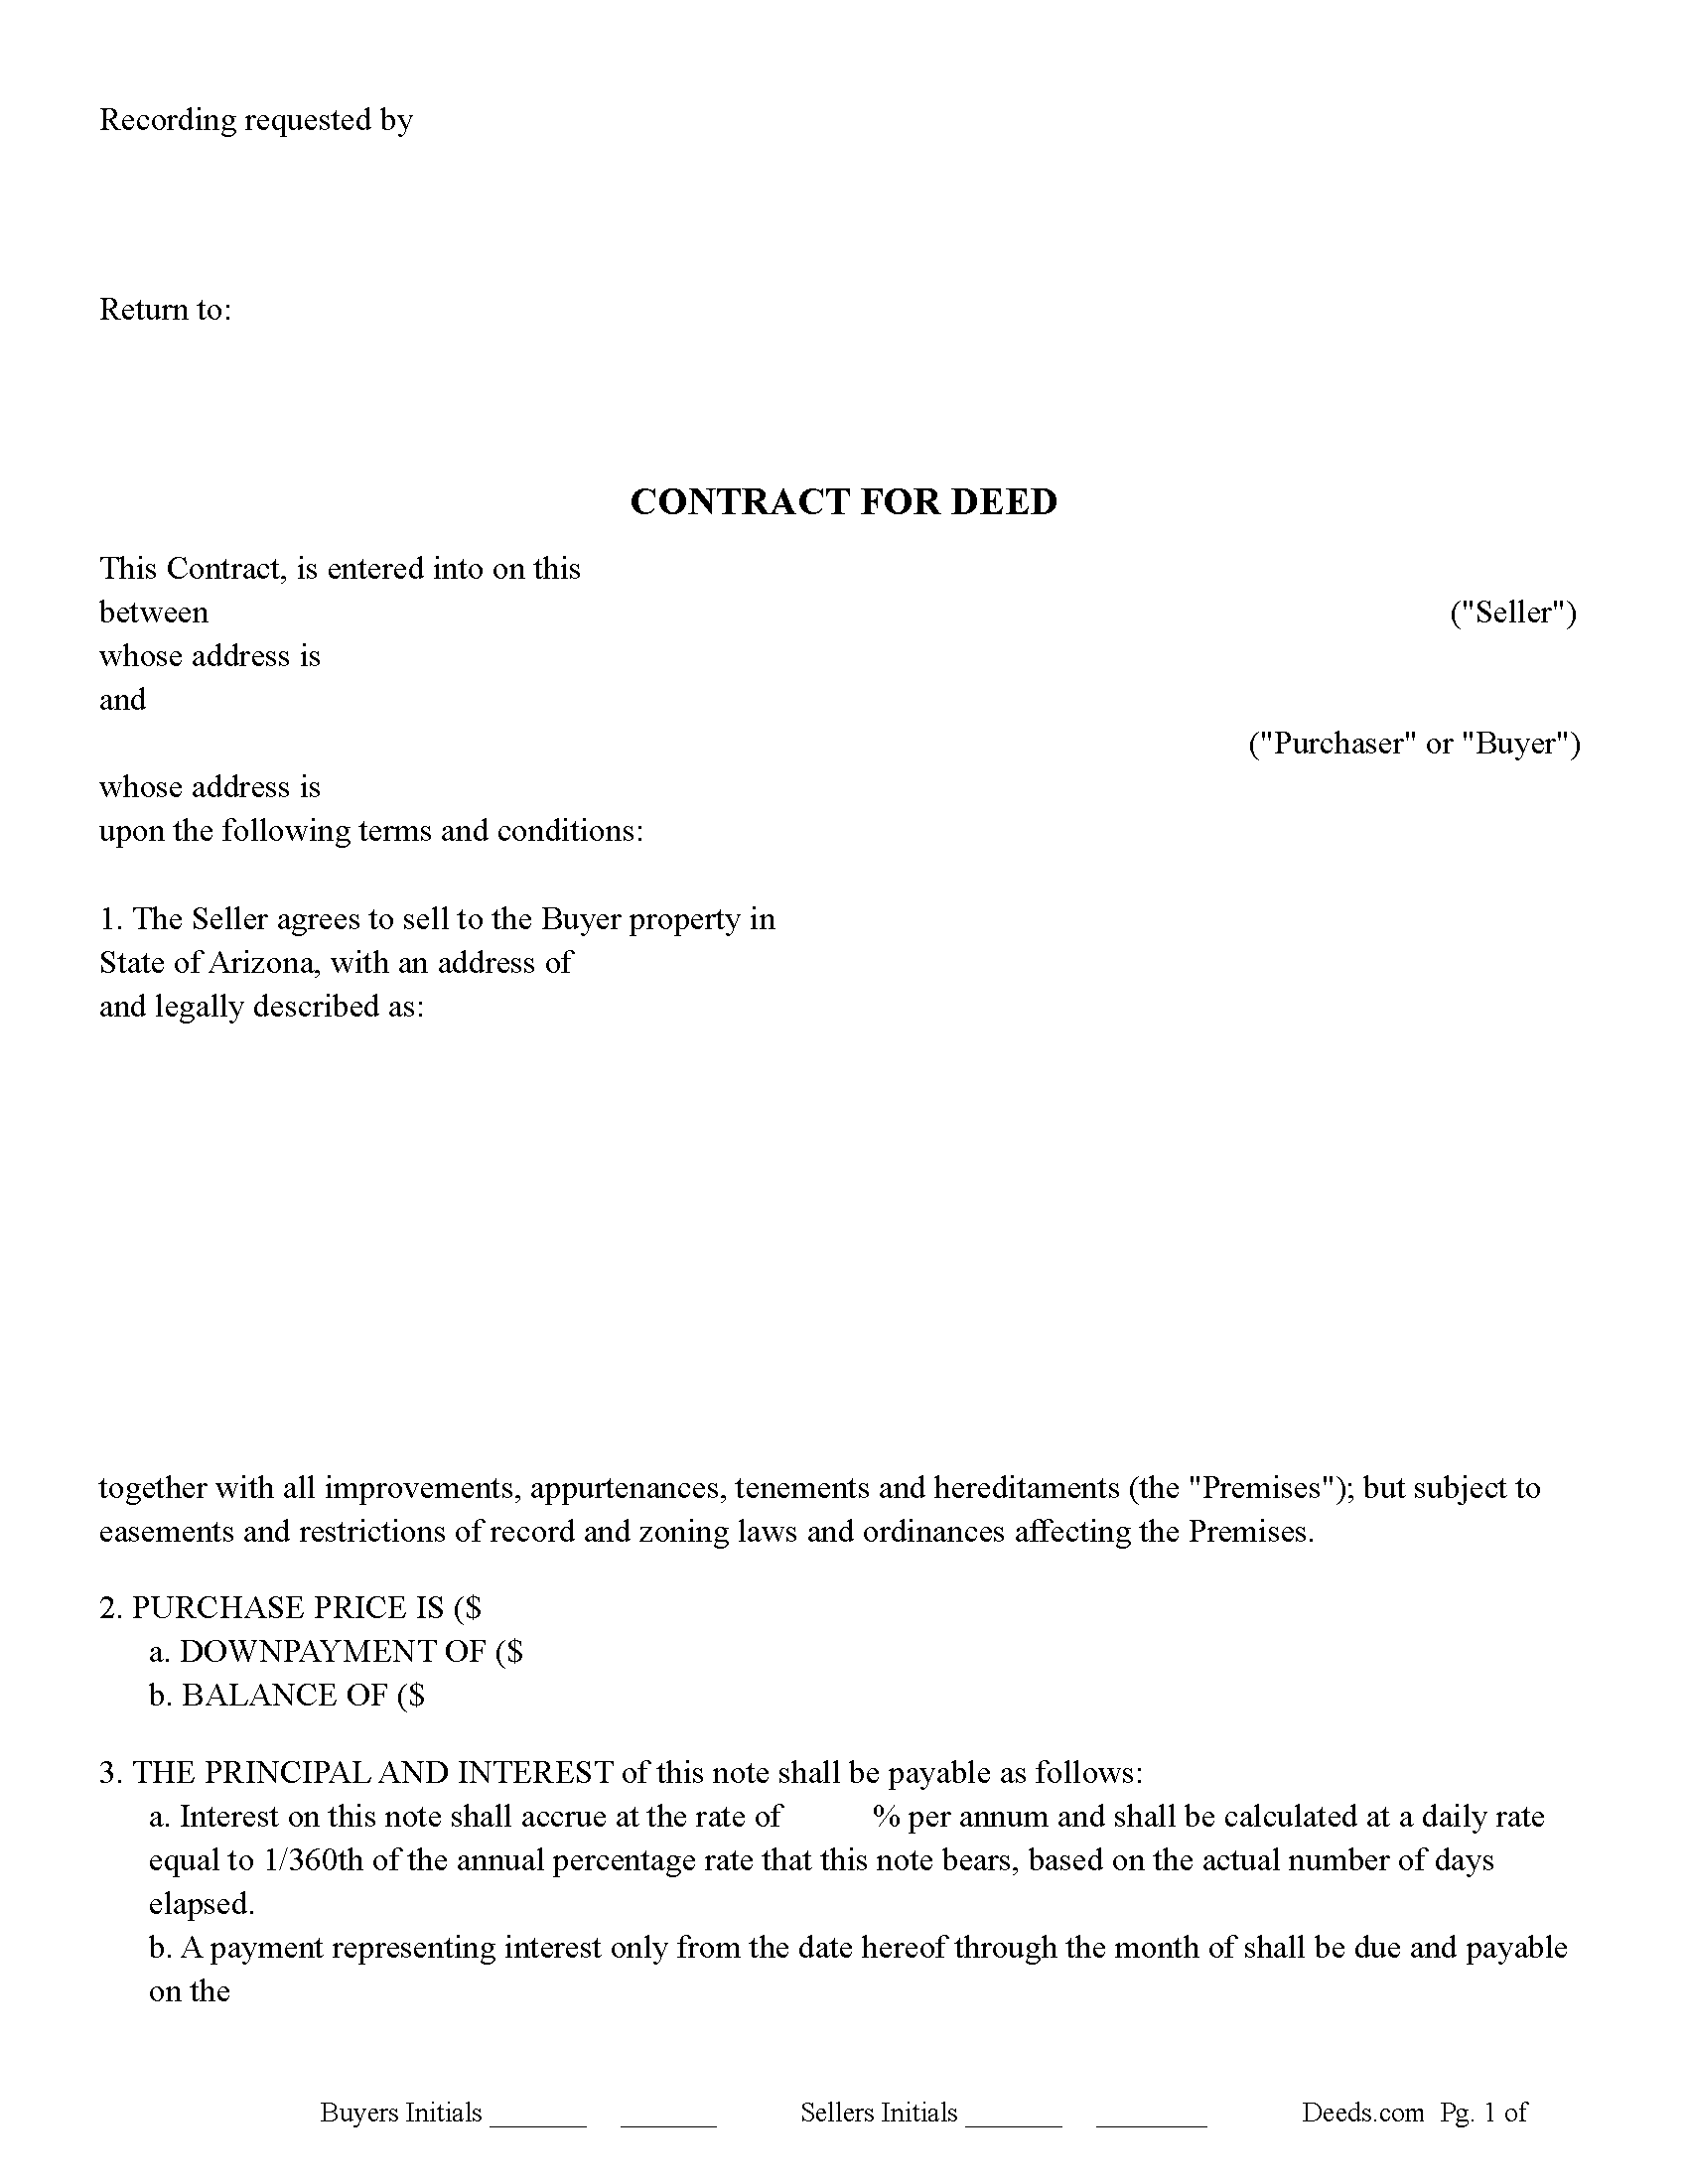 Maricopa County Contract for Deed Form